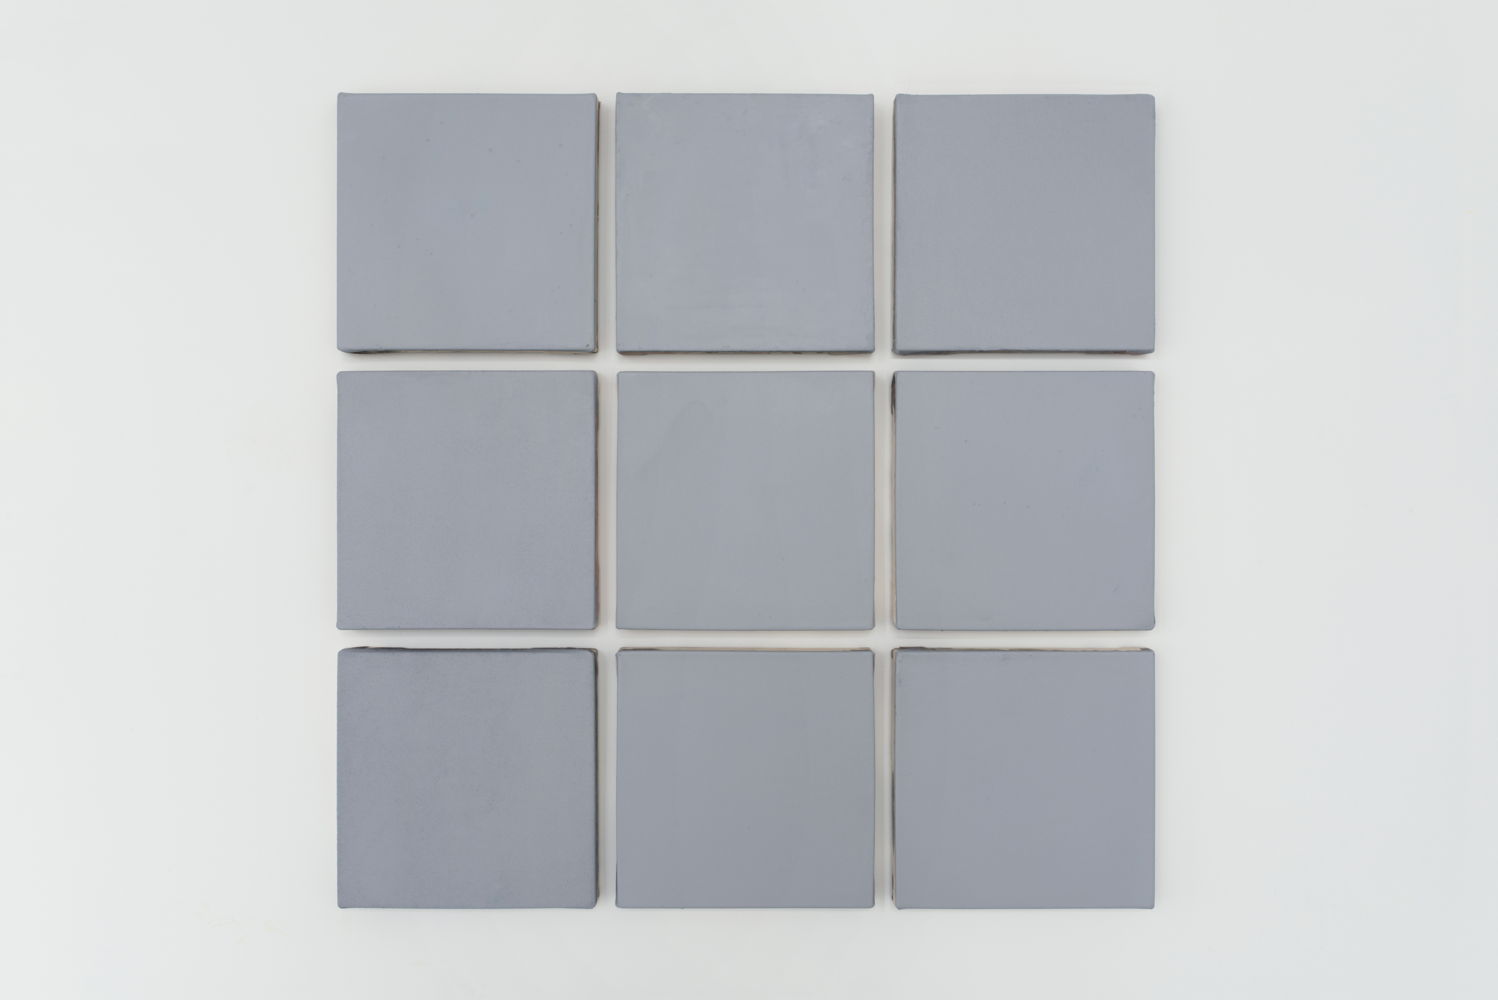 Olivier Mosset, Square Dance, 2021, Acrylic on canvas, 30,5 x 30 x cm (each) (photo credits Isabelle Arthuis)